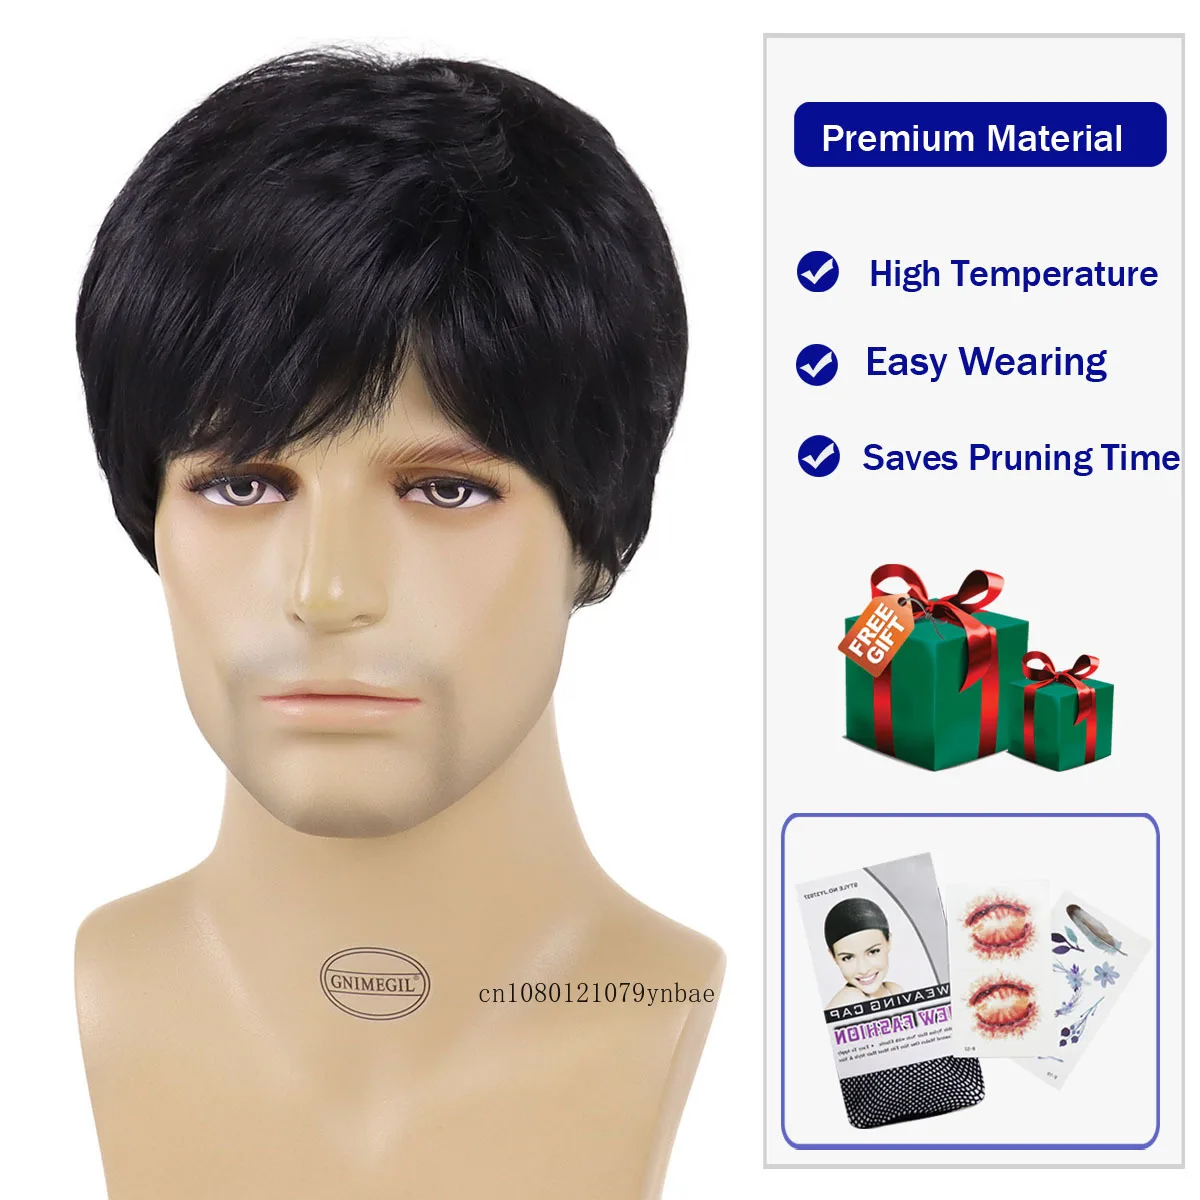 Synthetic Hair Natural Black Wigs for Men Short Haircuts with Bangs Cool Hairstyles Cosplay Wig Businessman Daddy Dark Brown Wig